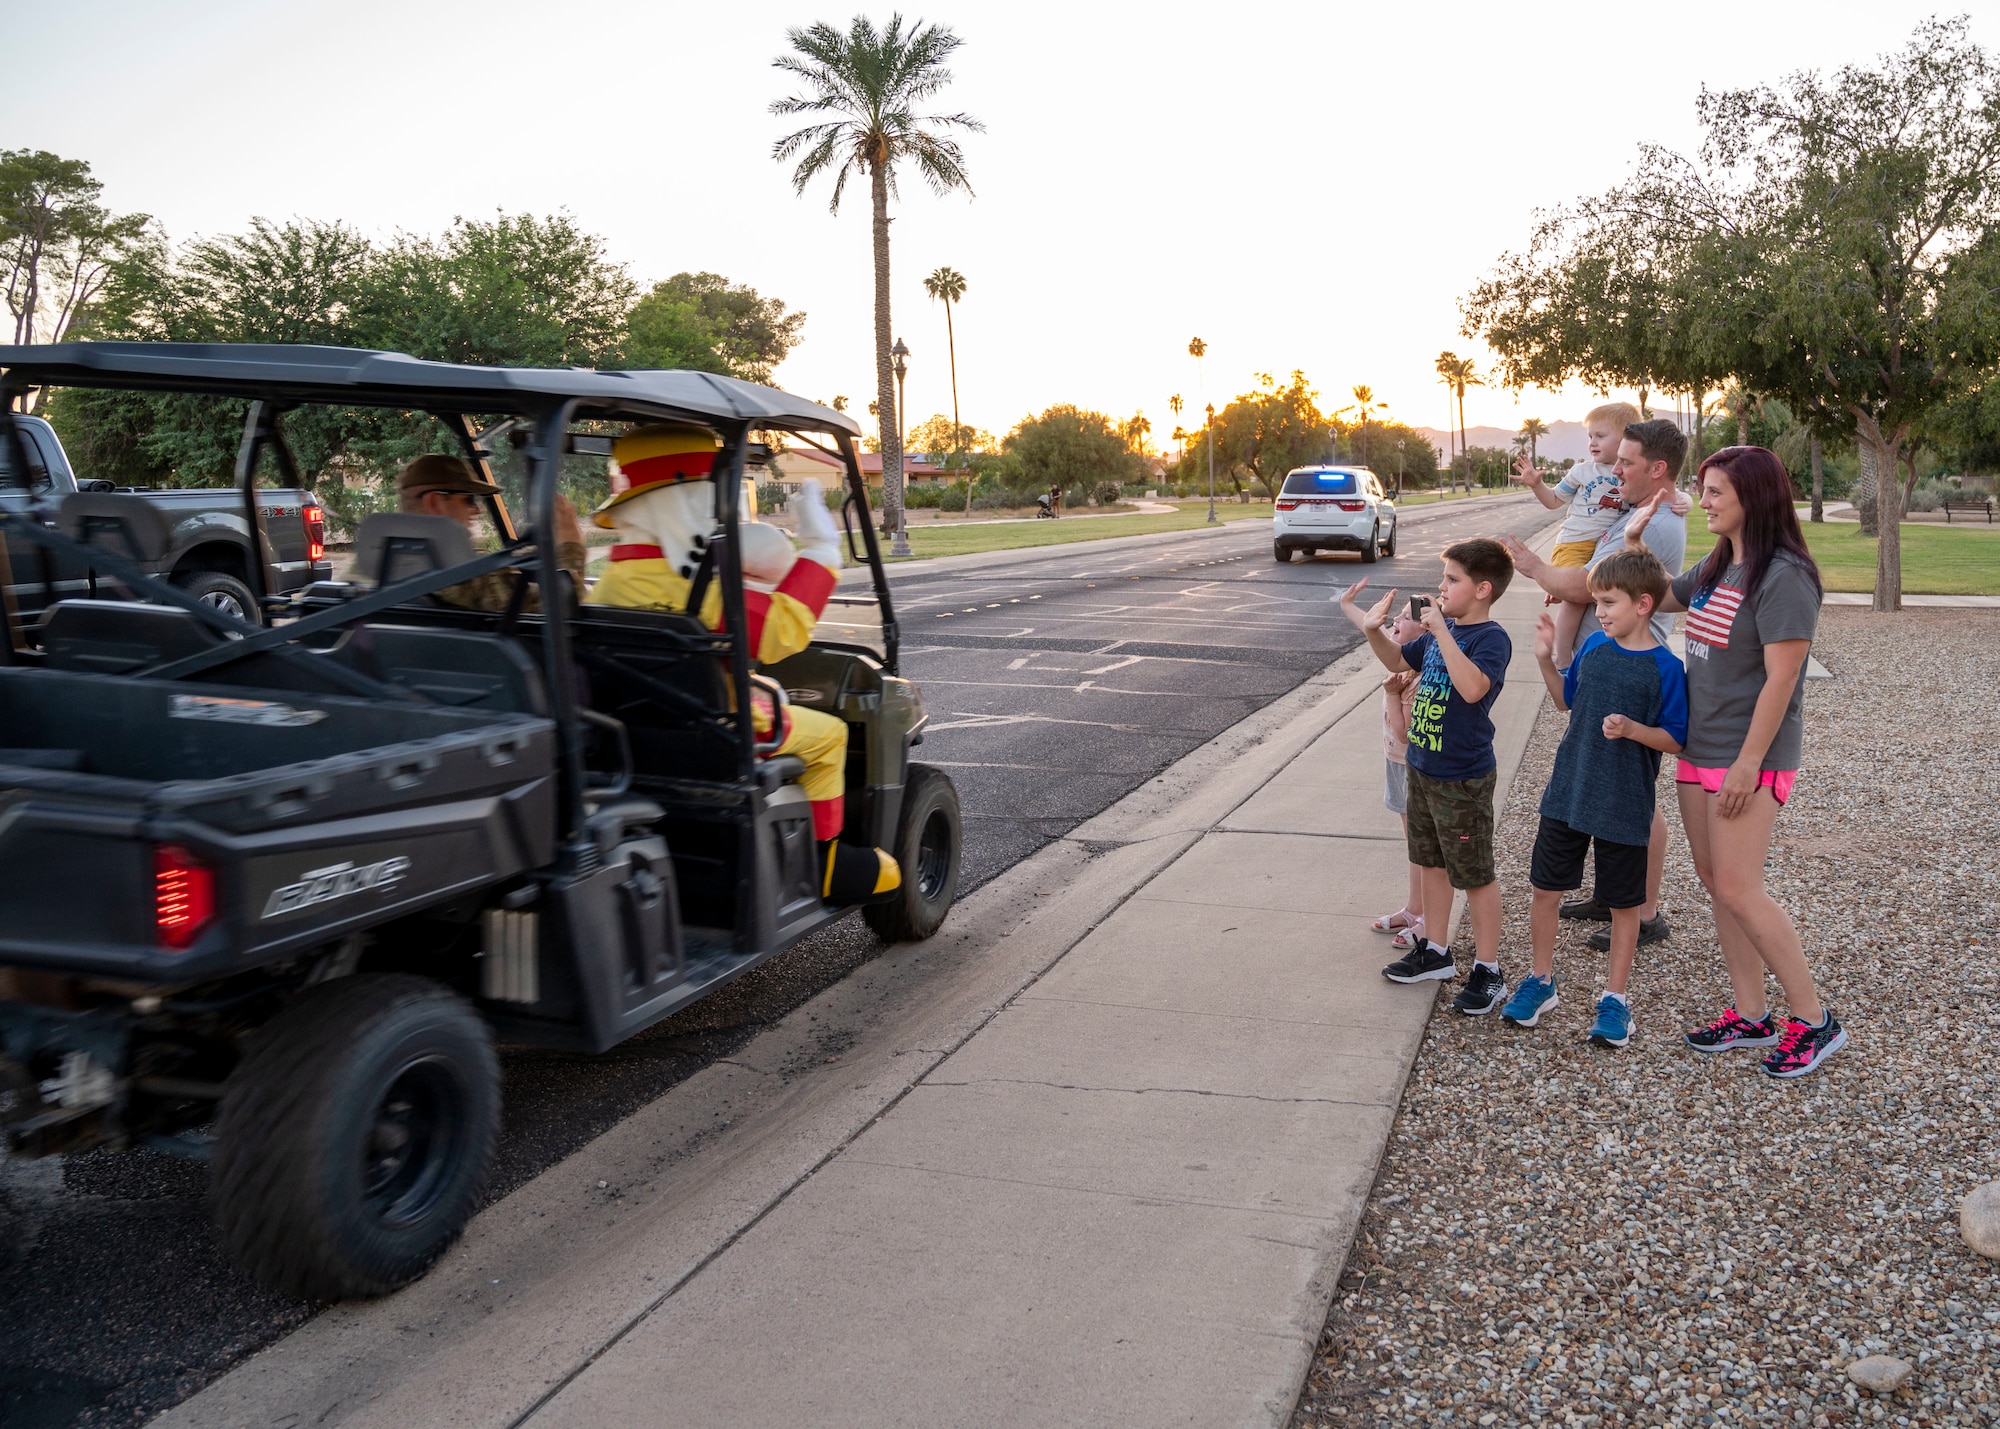 “Sparky”, 56th Civil Engineer Squadron Fire Department mascot, waves hello to a Luke Air Force Base family during the Fire Prevention Week parade Oct. 13, 2022, at Luke Air Force Base, Arizona.